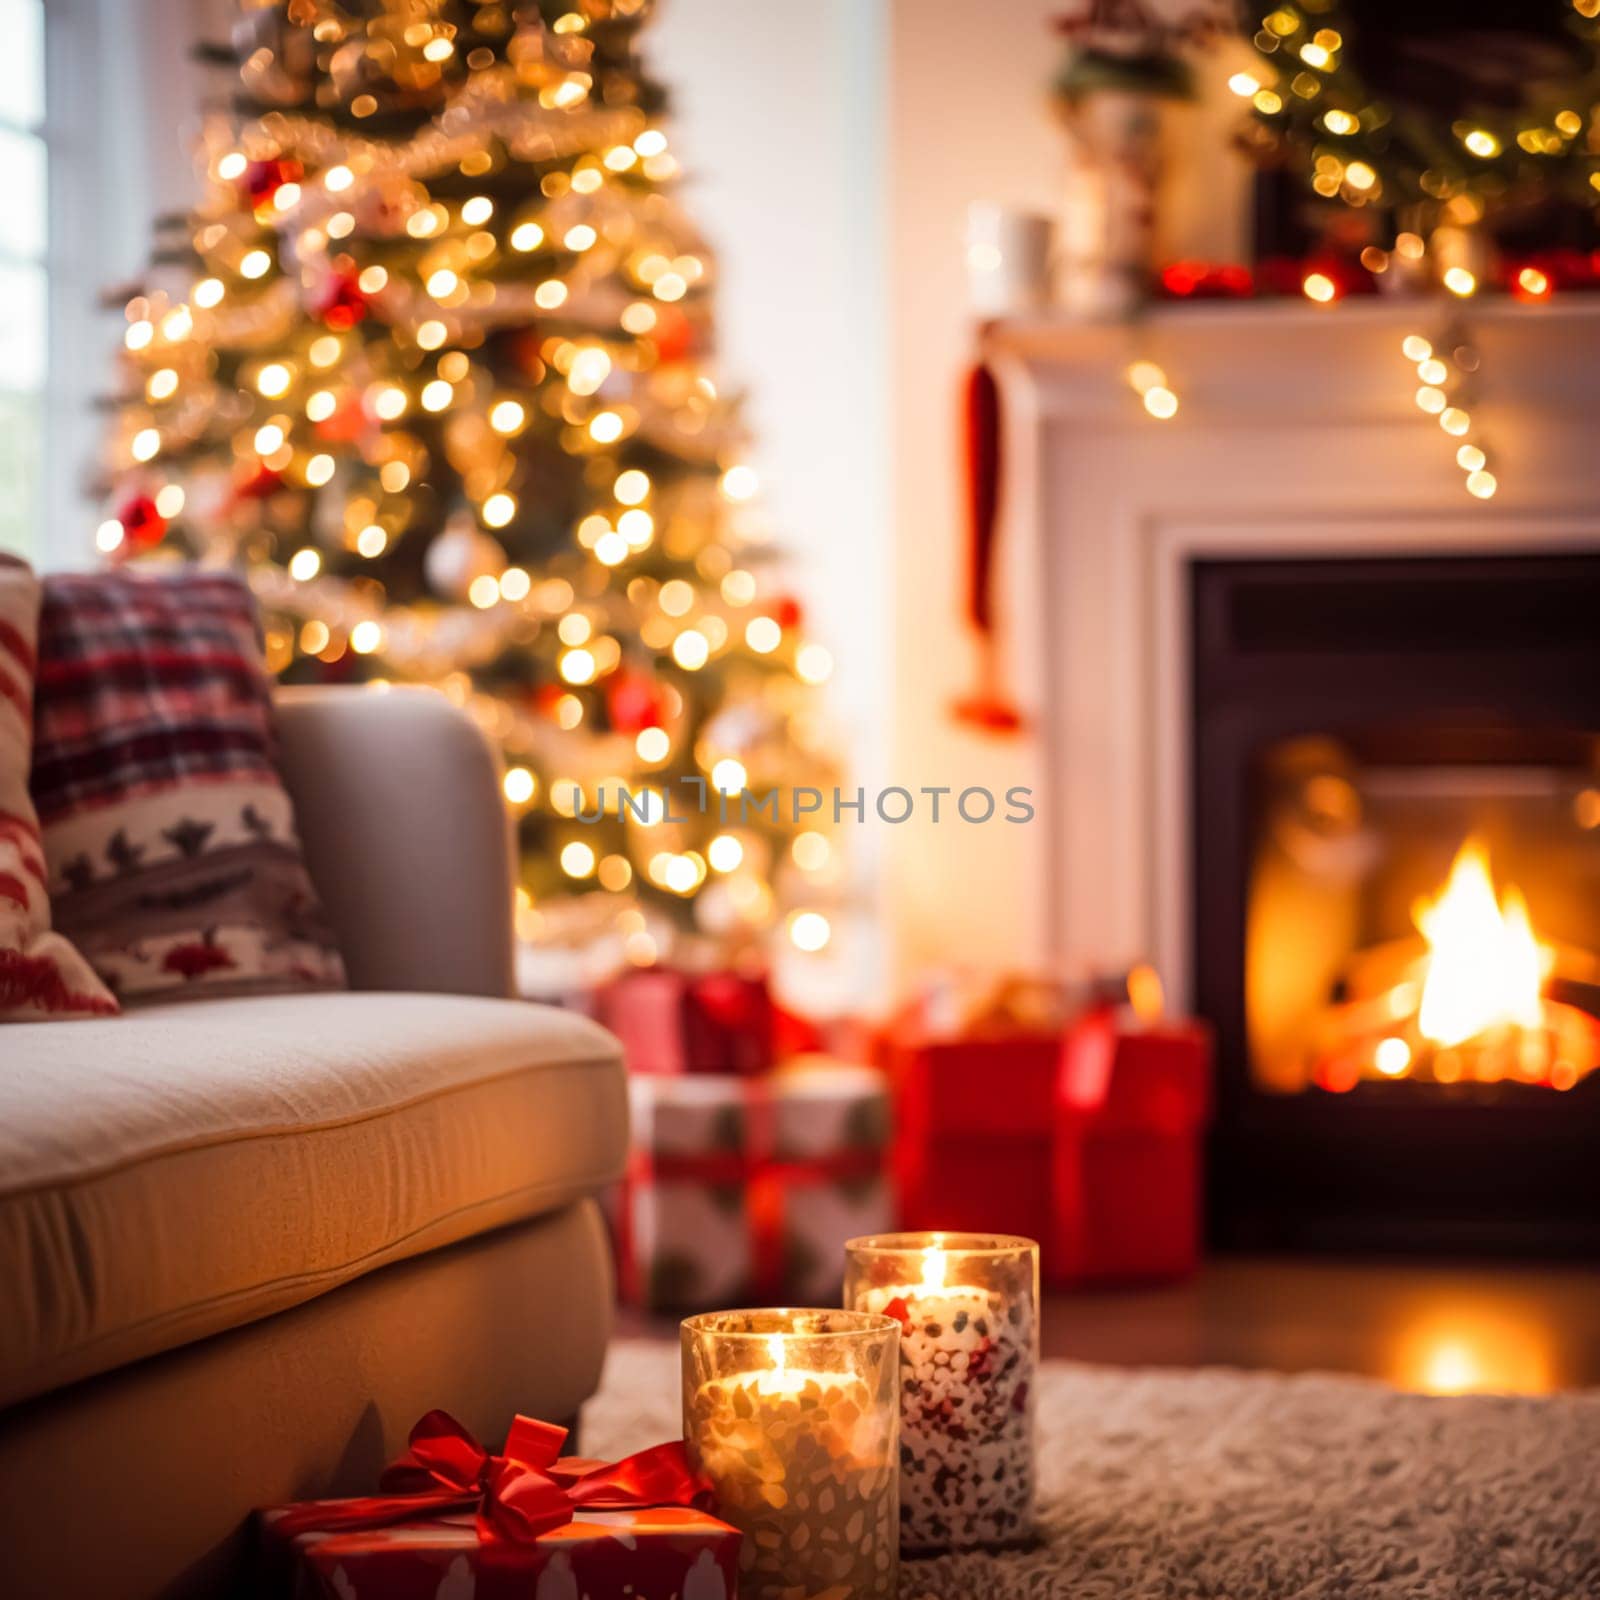 Christmas decor, holiday time and country cottage style, cosy atmosphere, decorations in the English countryside house with Christmas tree and fireplace on background, winter holidays idea